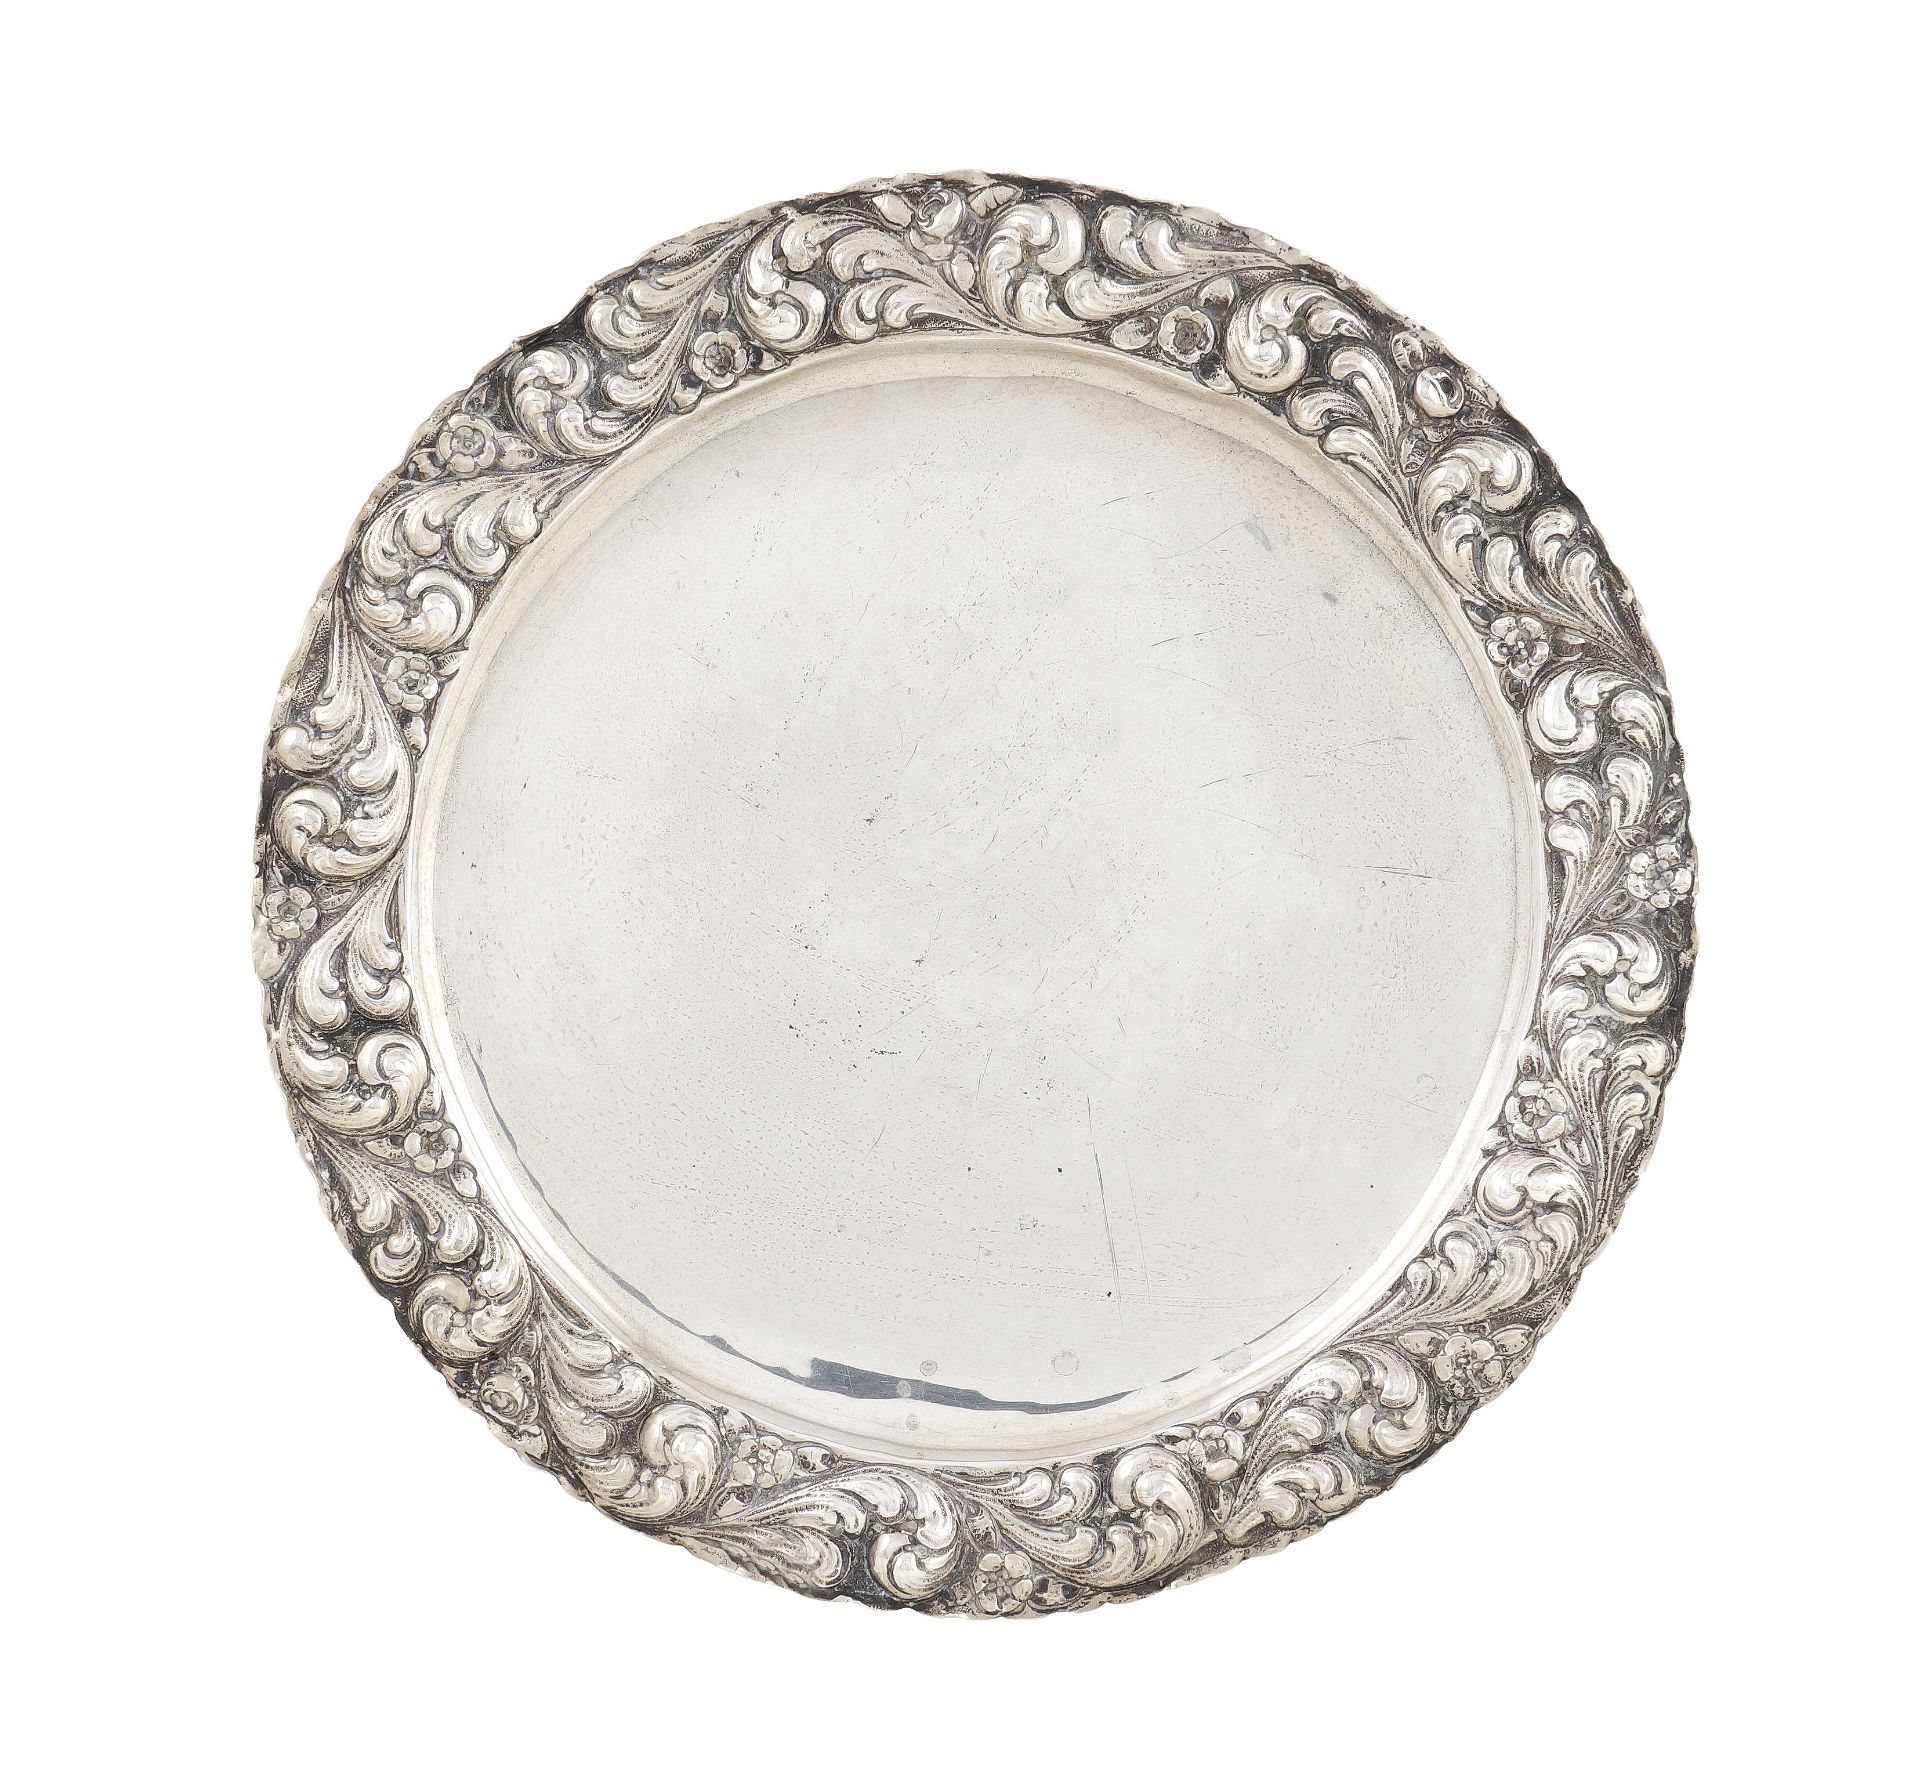 A silver plate late 19th century d. 40 cm.